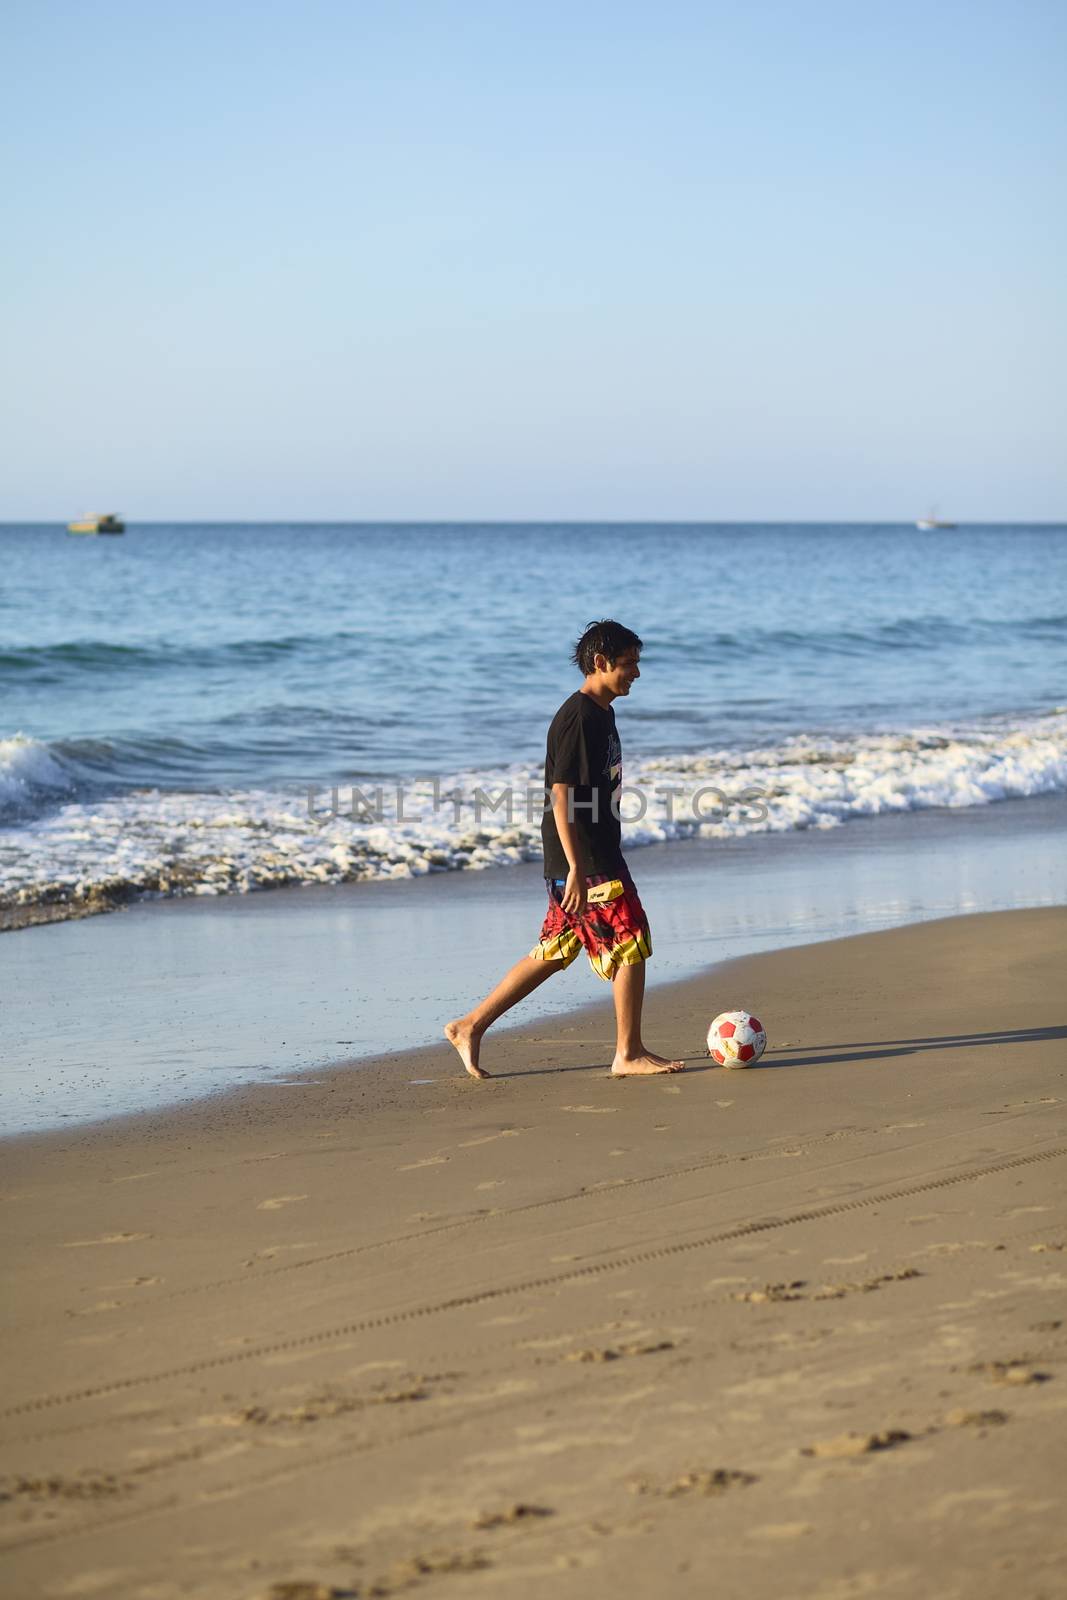 LOS ORGANOS, PERU - AUGUST 30, 2013: Unidentified young man playing football on the sandy beach on August 30, 2013 in Los Organos, Peru. Los Organos is a small beach town in Northern Peru.